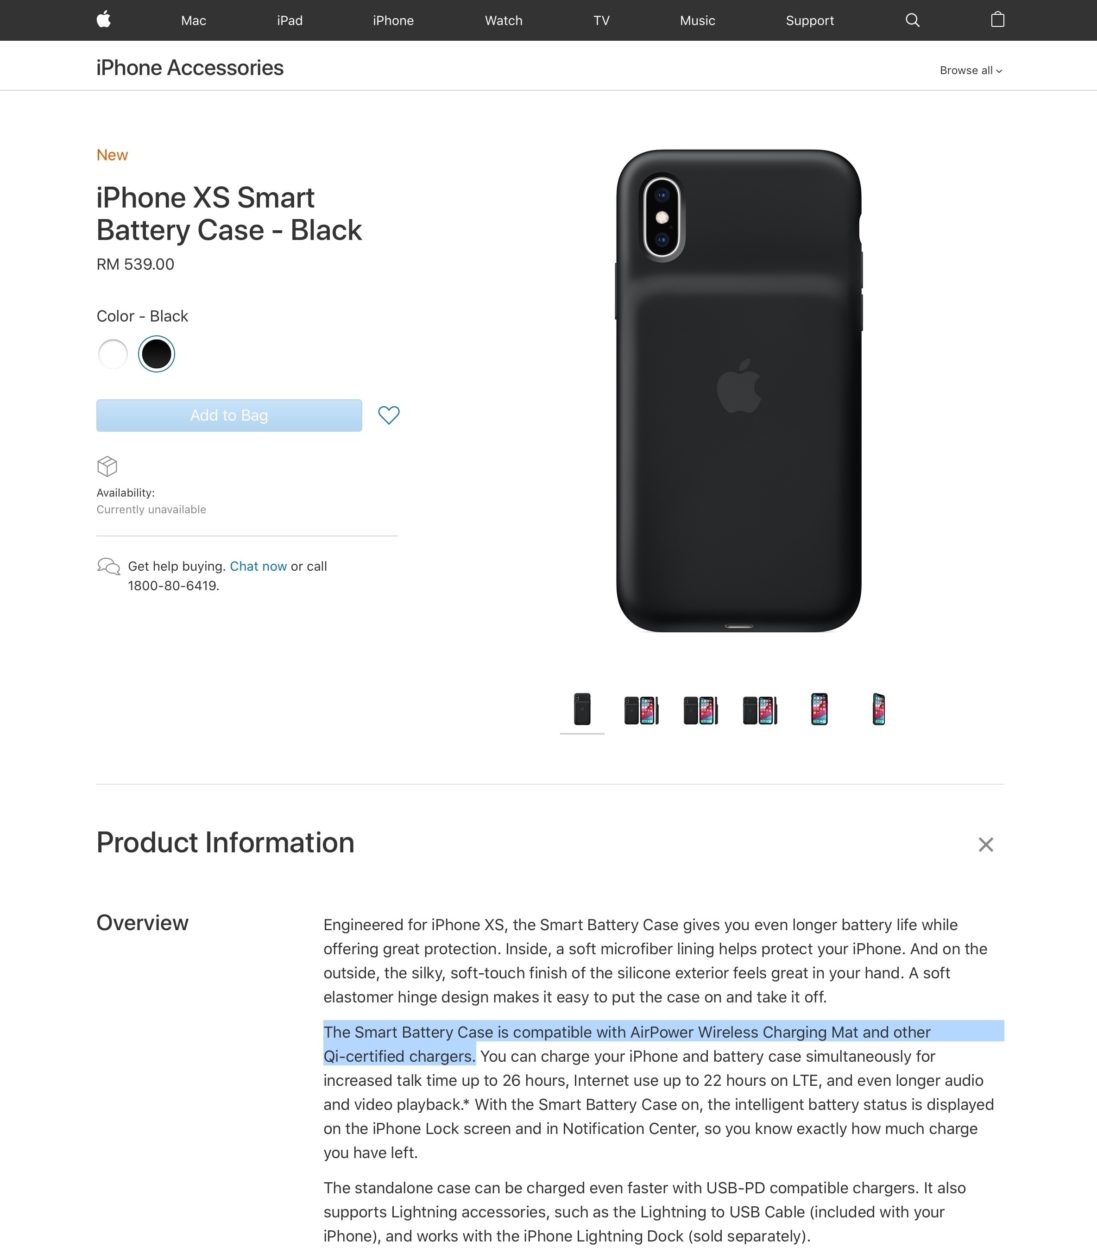 AirPower reference appears on Smart Battery Case page